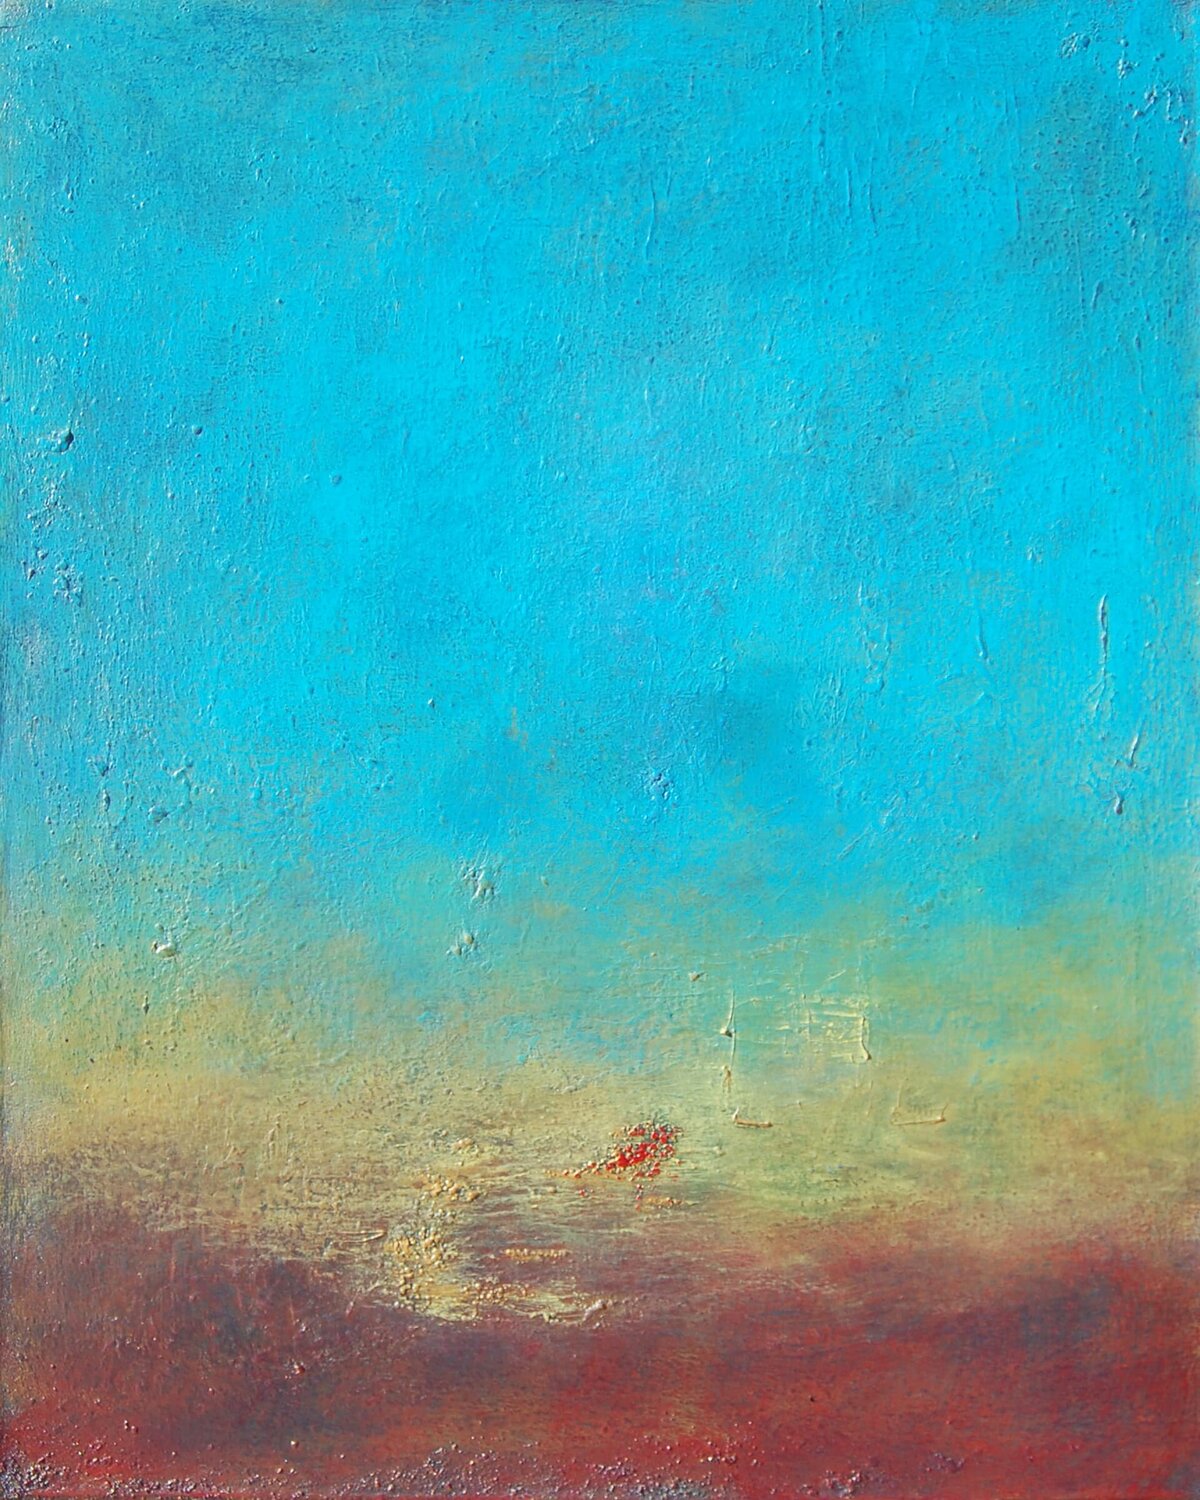 Andrea_Cermanski_Rising_from_the_Meadow_Yellow_Turquoise_Abstract_Painting_on_Canvas